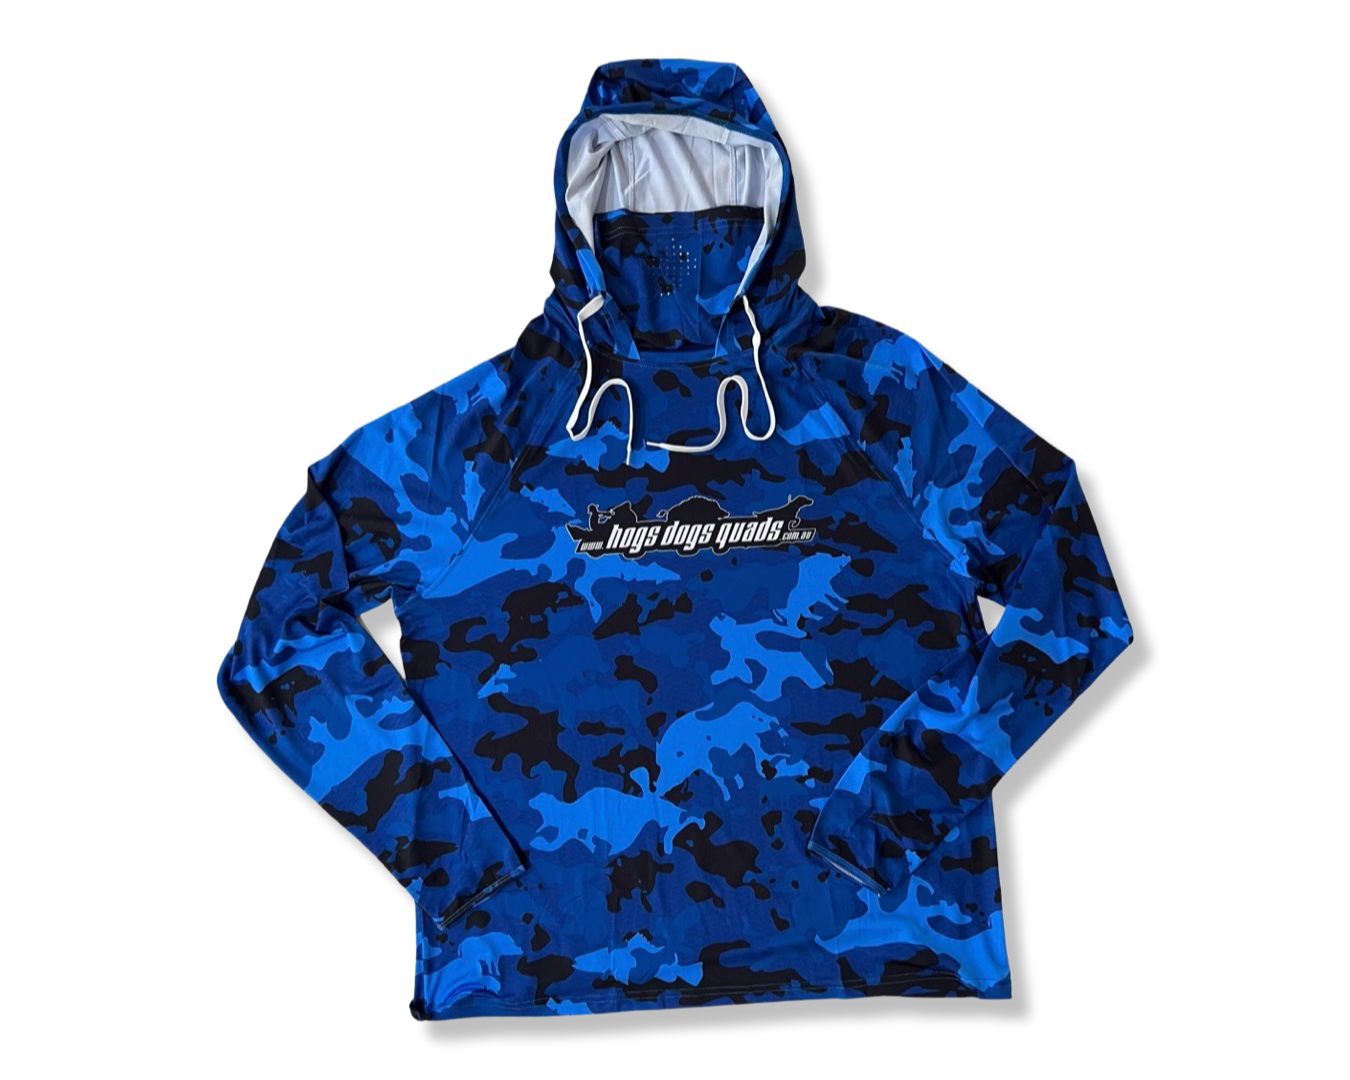 Navy Blue Camo Hoodie & Buff in one! - Hogs Dogs Quads Shop